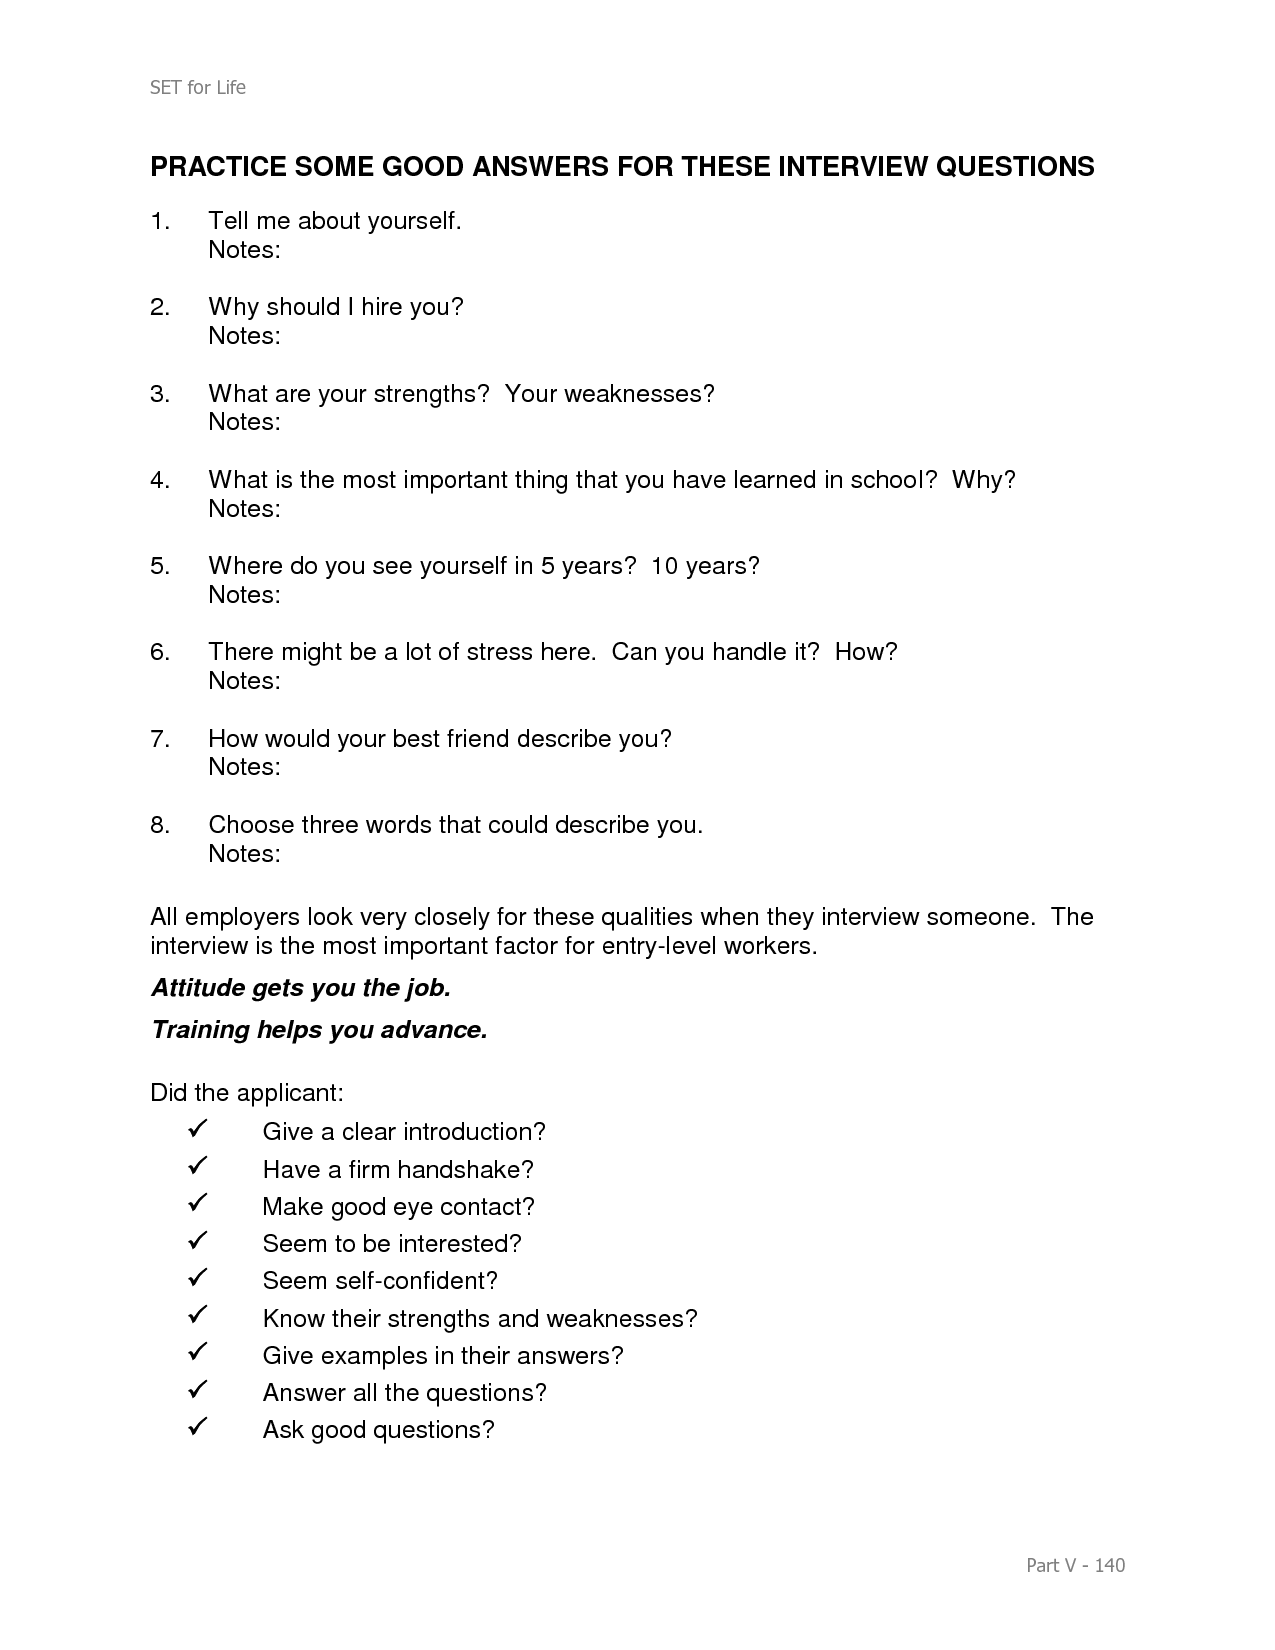 Interview Questions and Answers Printable Image